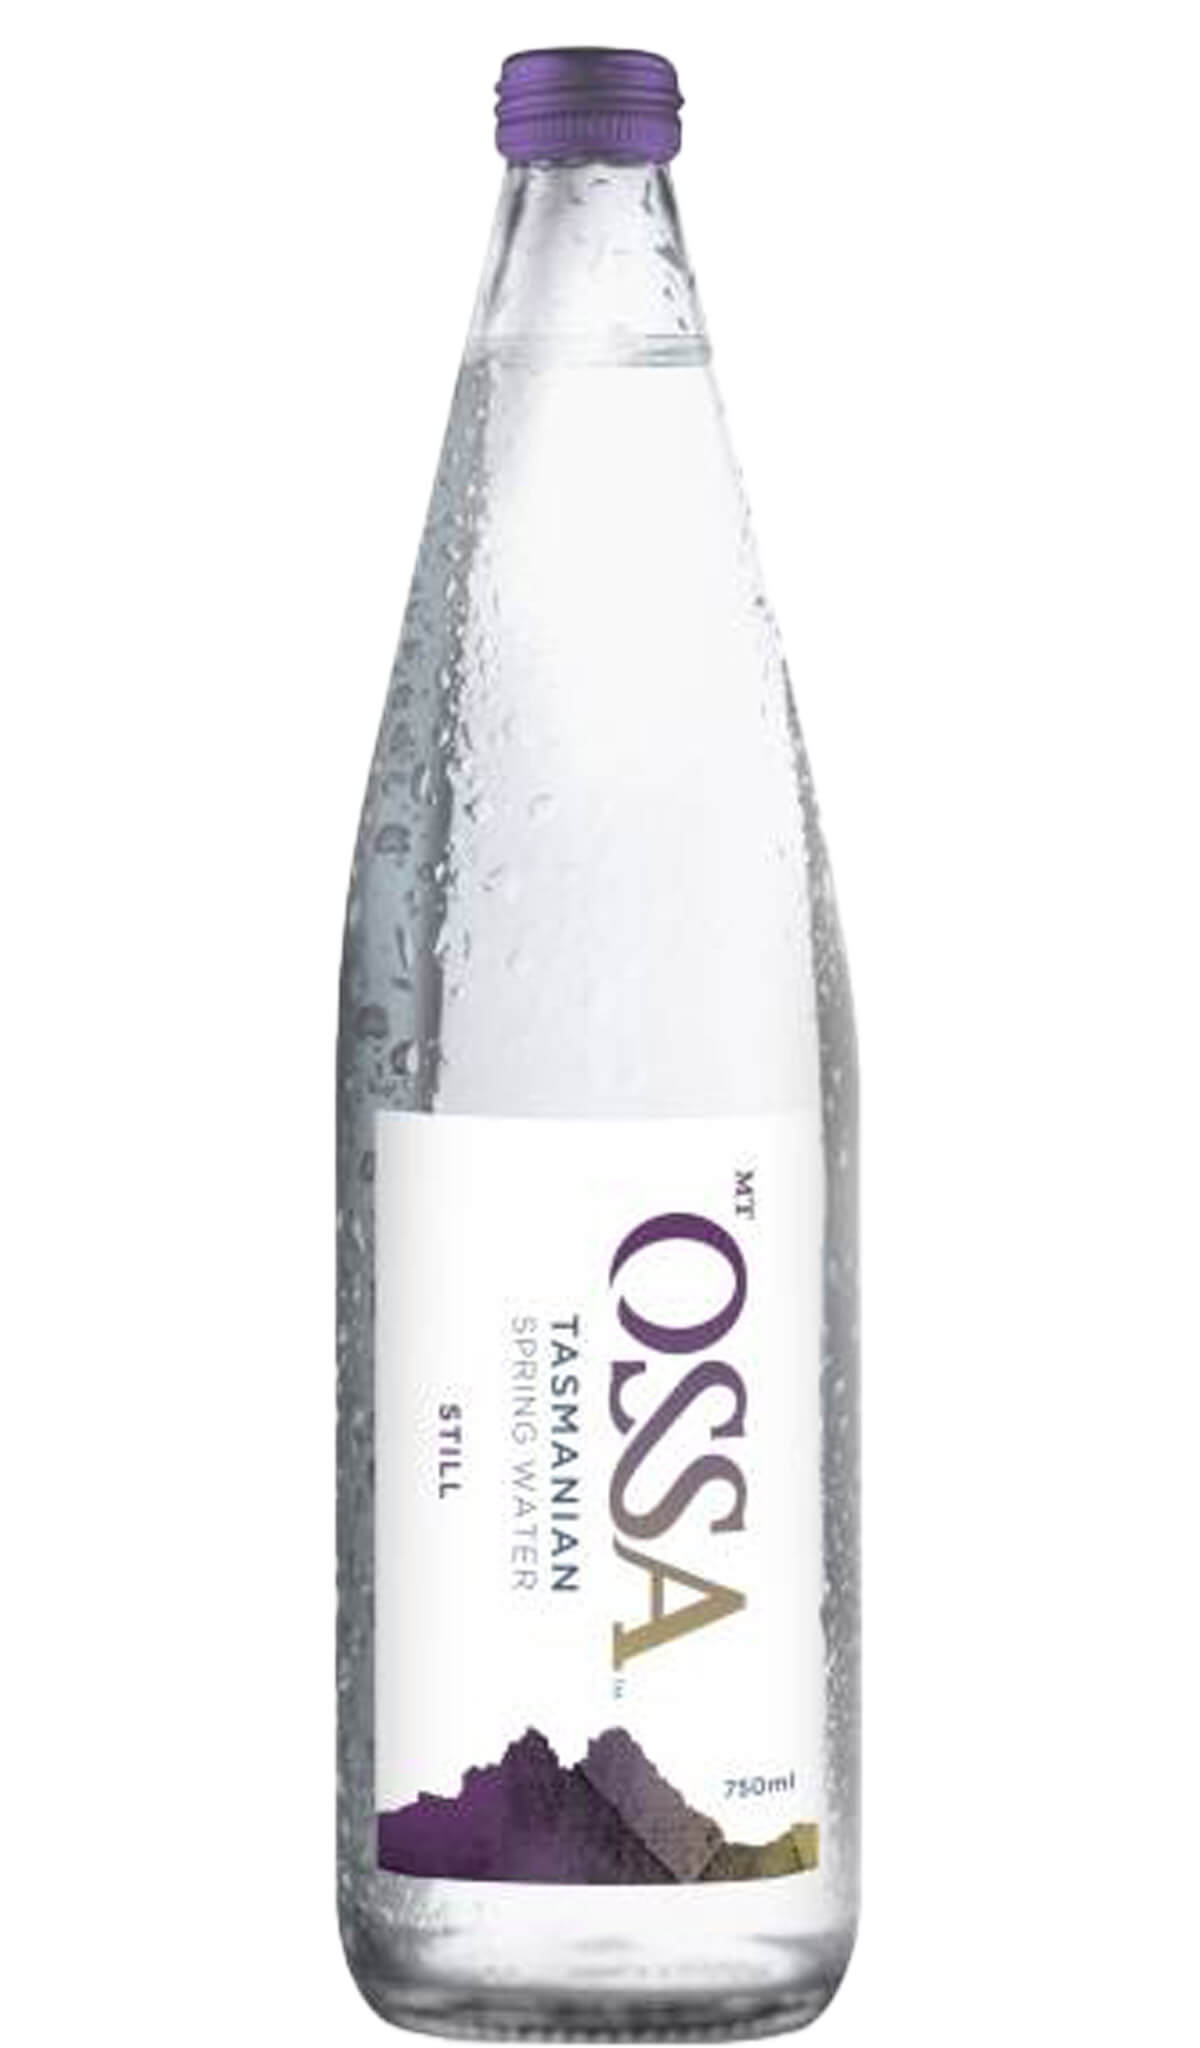 Find out more, explore the range and purchase Mt Ossa Tasmanian Spring Water Still 750mL available online at Wine Sellers Direct - Australia's independent liquor specialists.